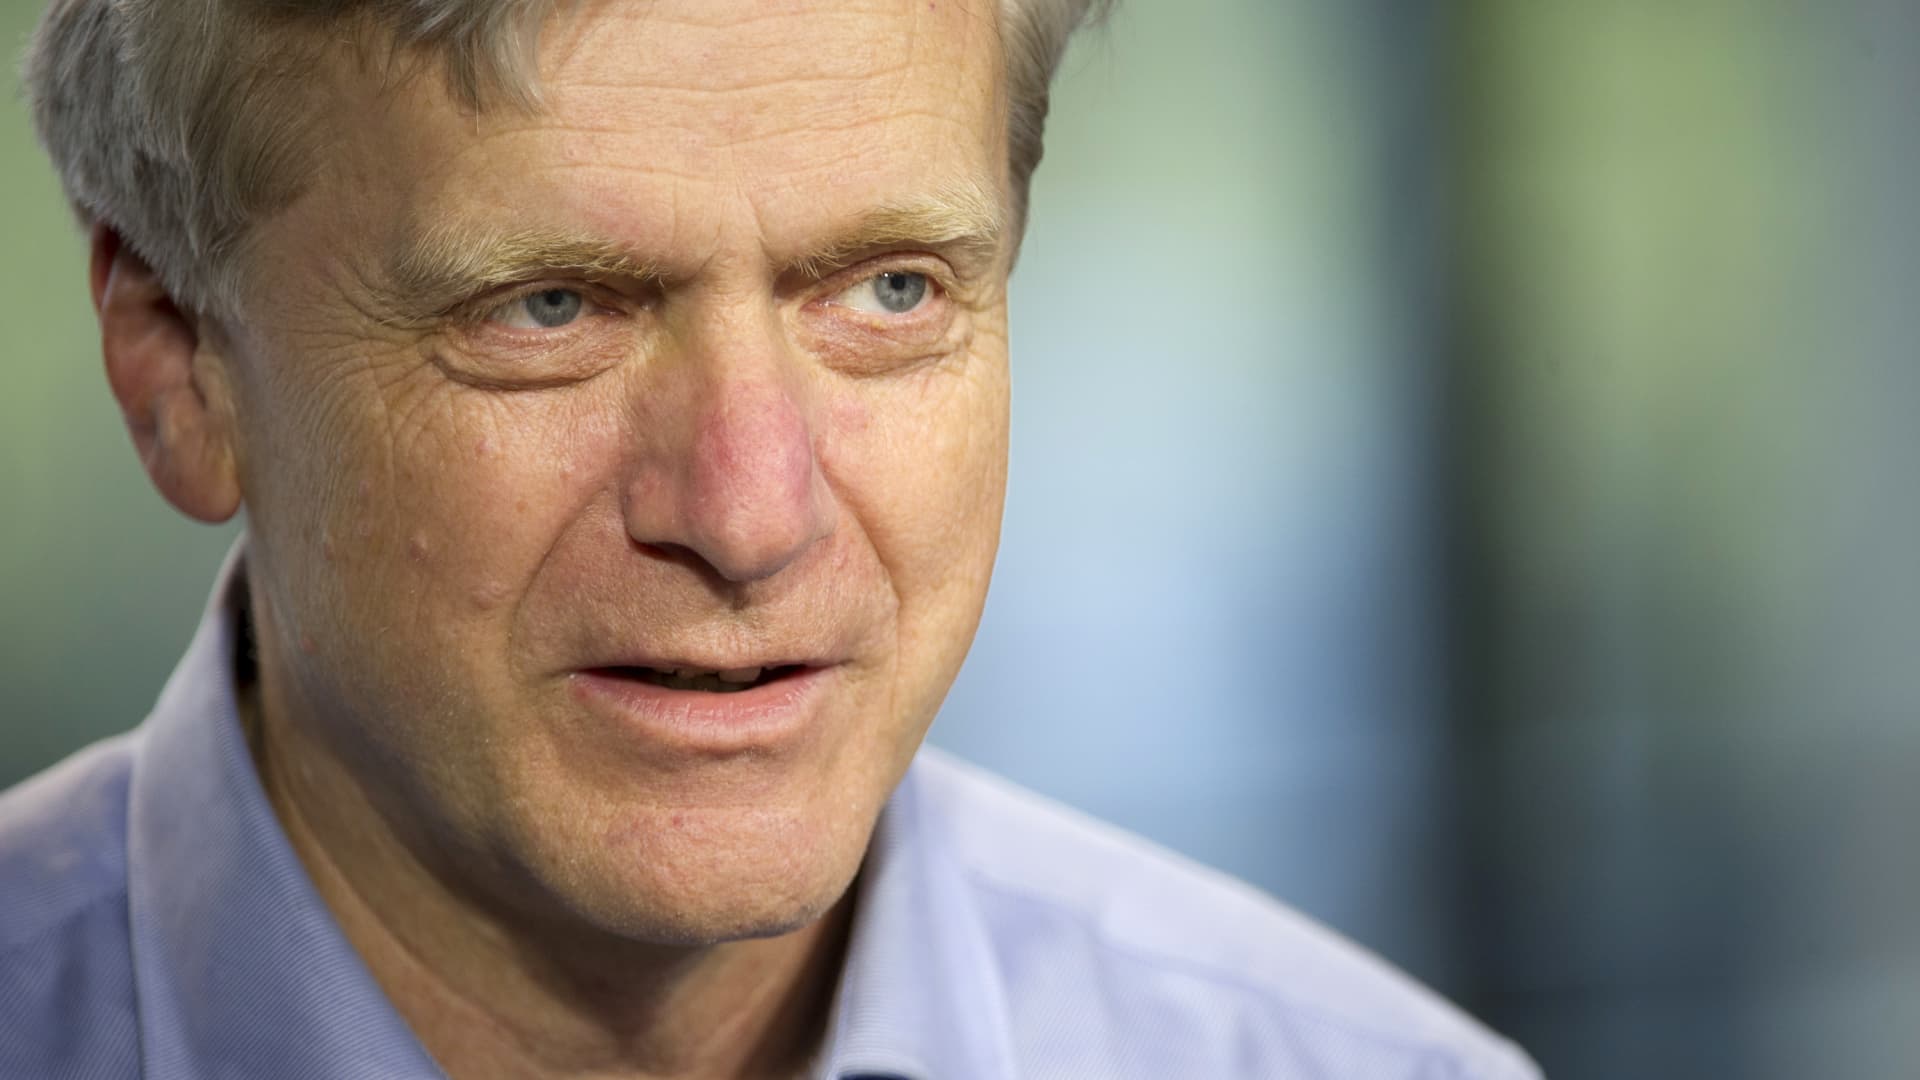 SEC settles insider trading charges against Andy Bechtolsheim, co-founder of Arista, Sun Microsystems